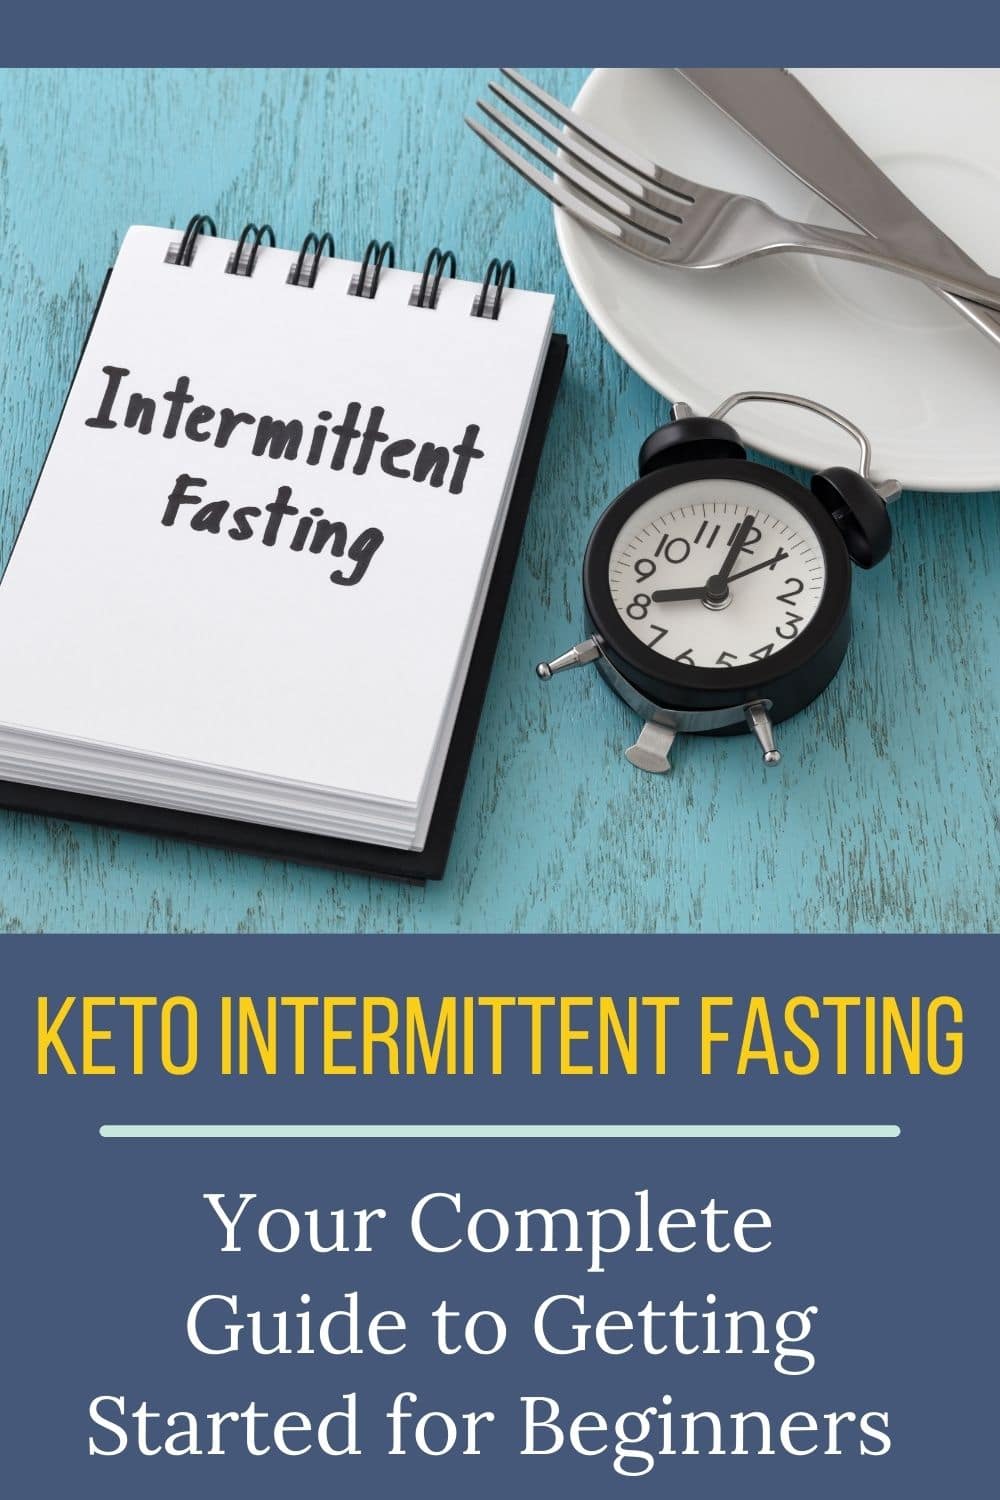 image for keto intermittent fasting